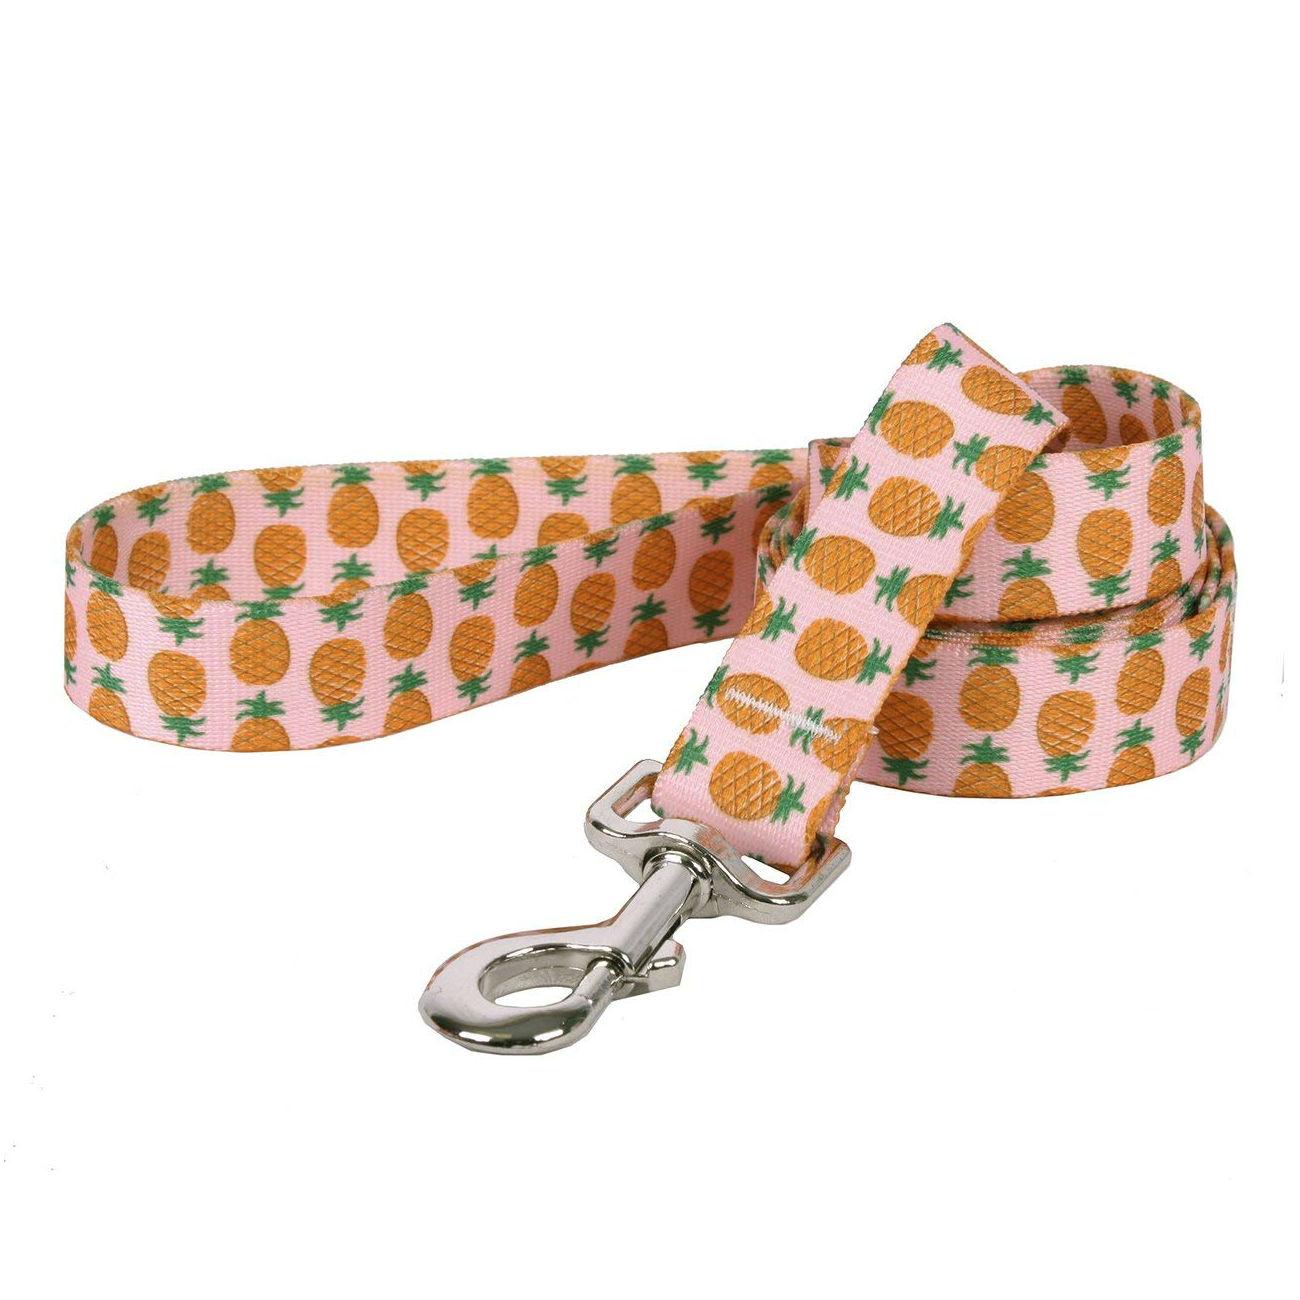 Pineapples Dog Leash by Yellow Dog - Pink